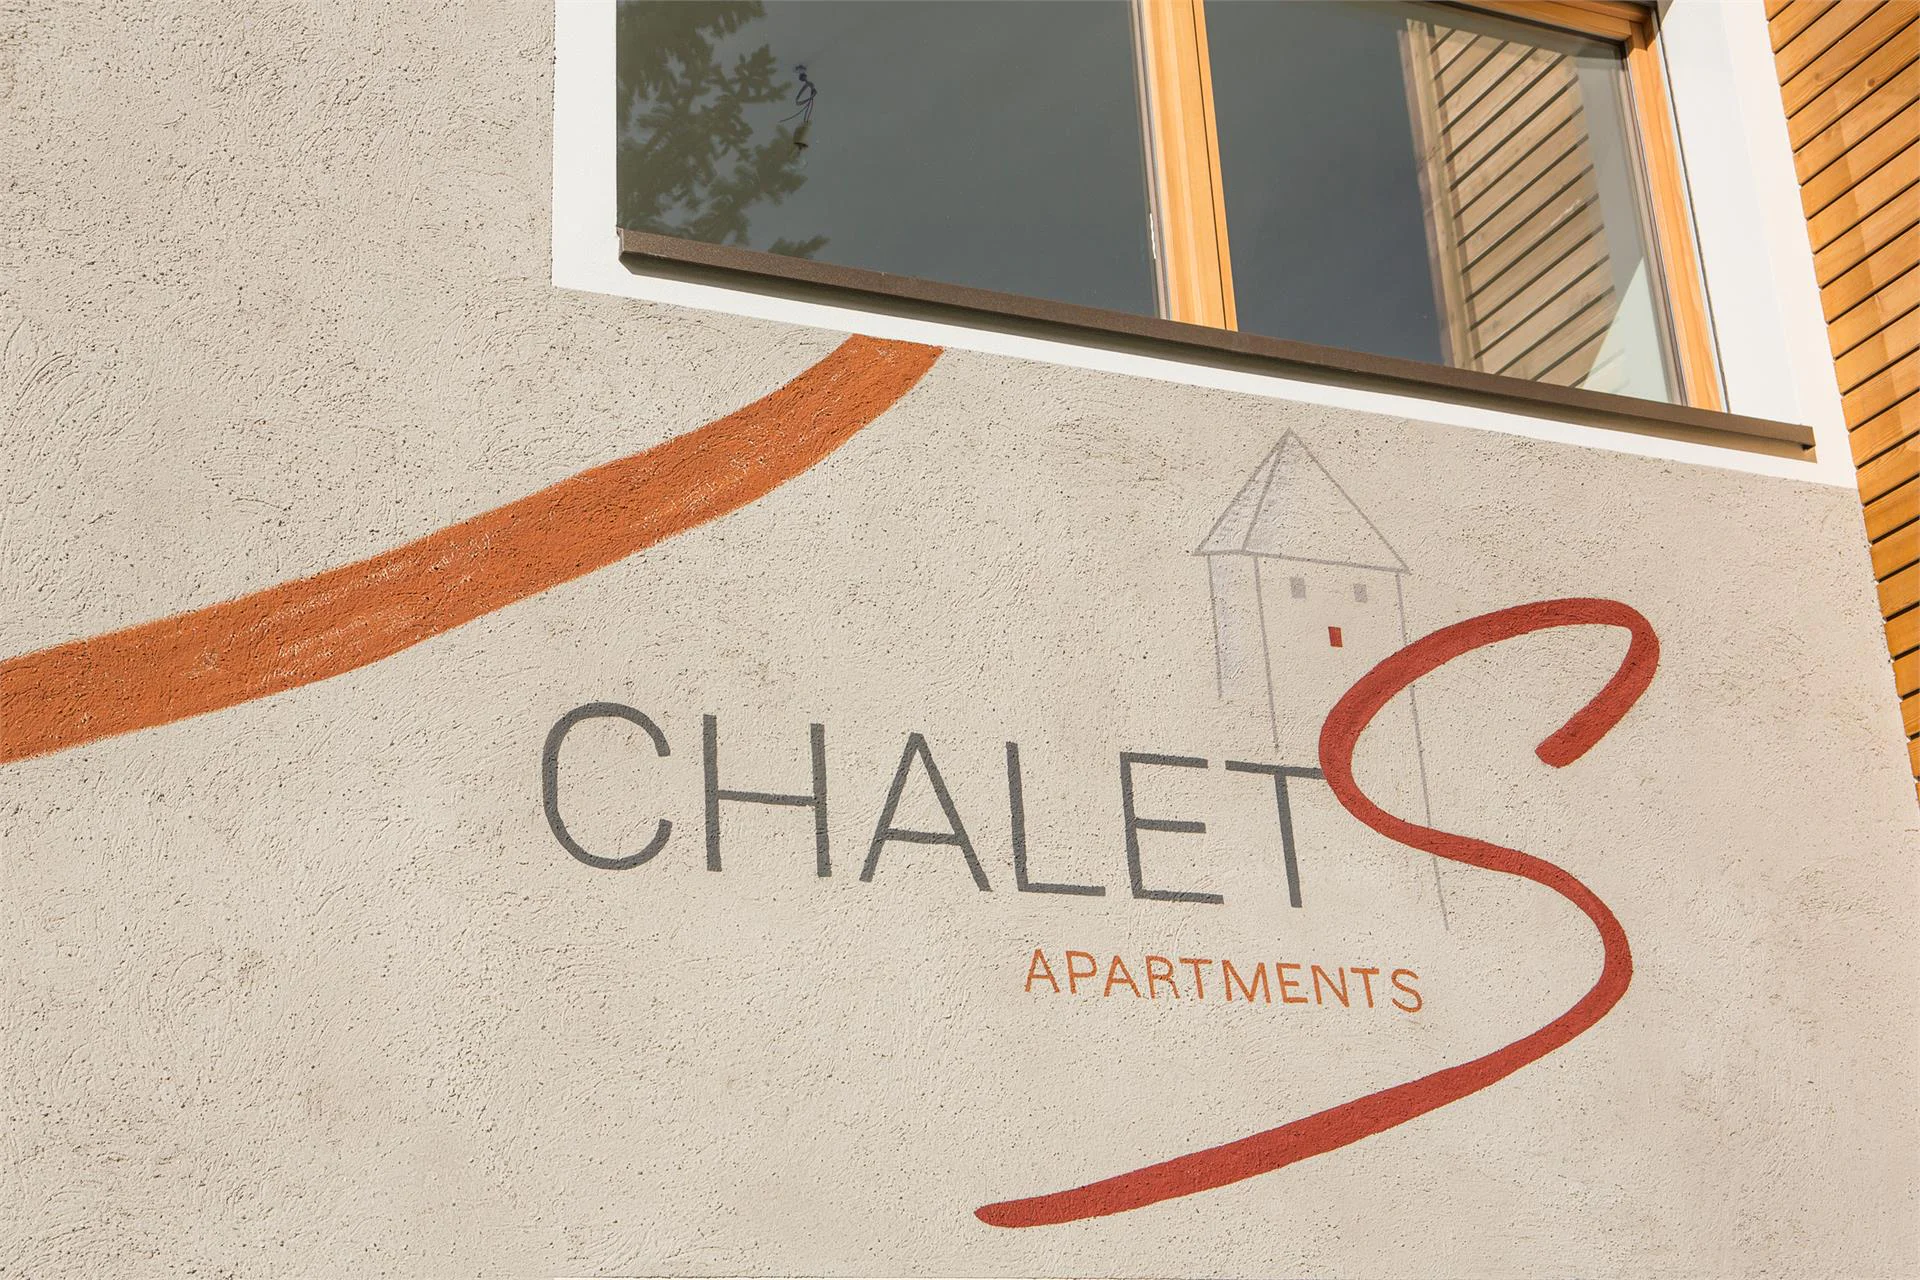 Chalet S Apartments Sand in Taufers/Campo Tures 8 suedtirol.info